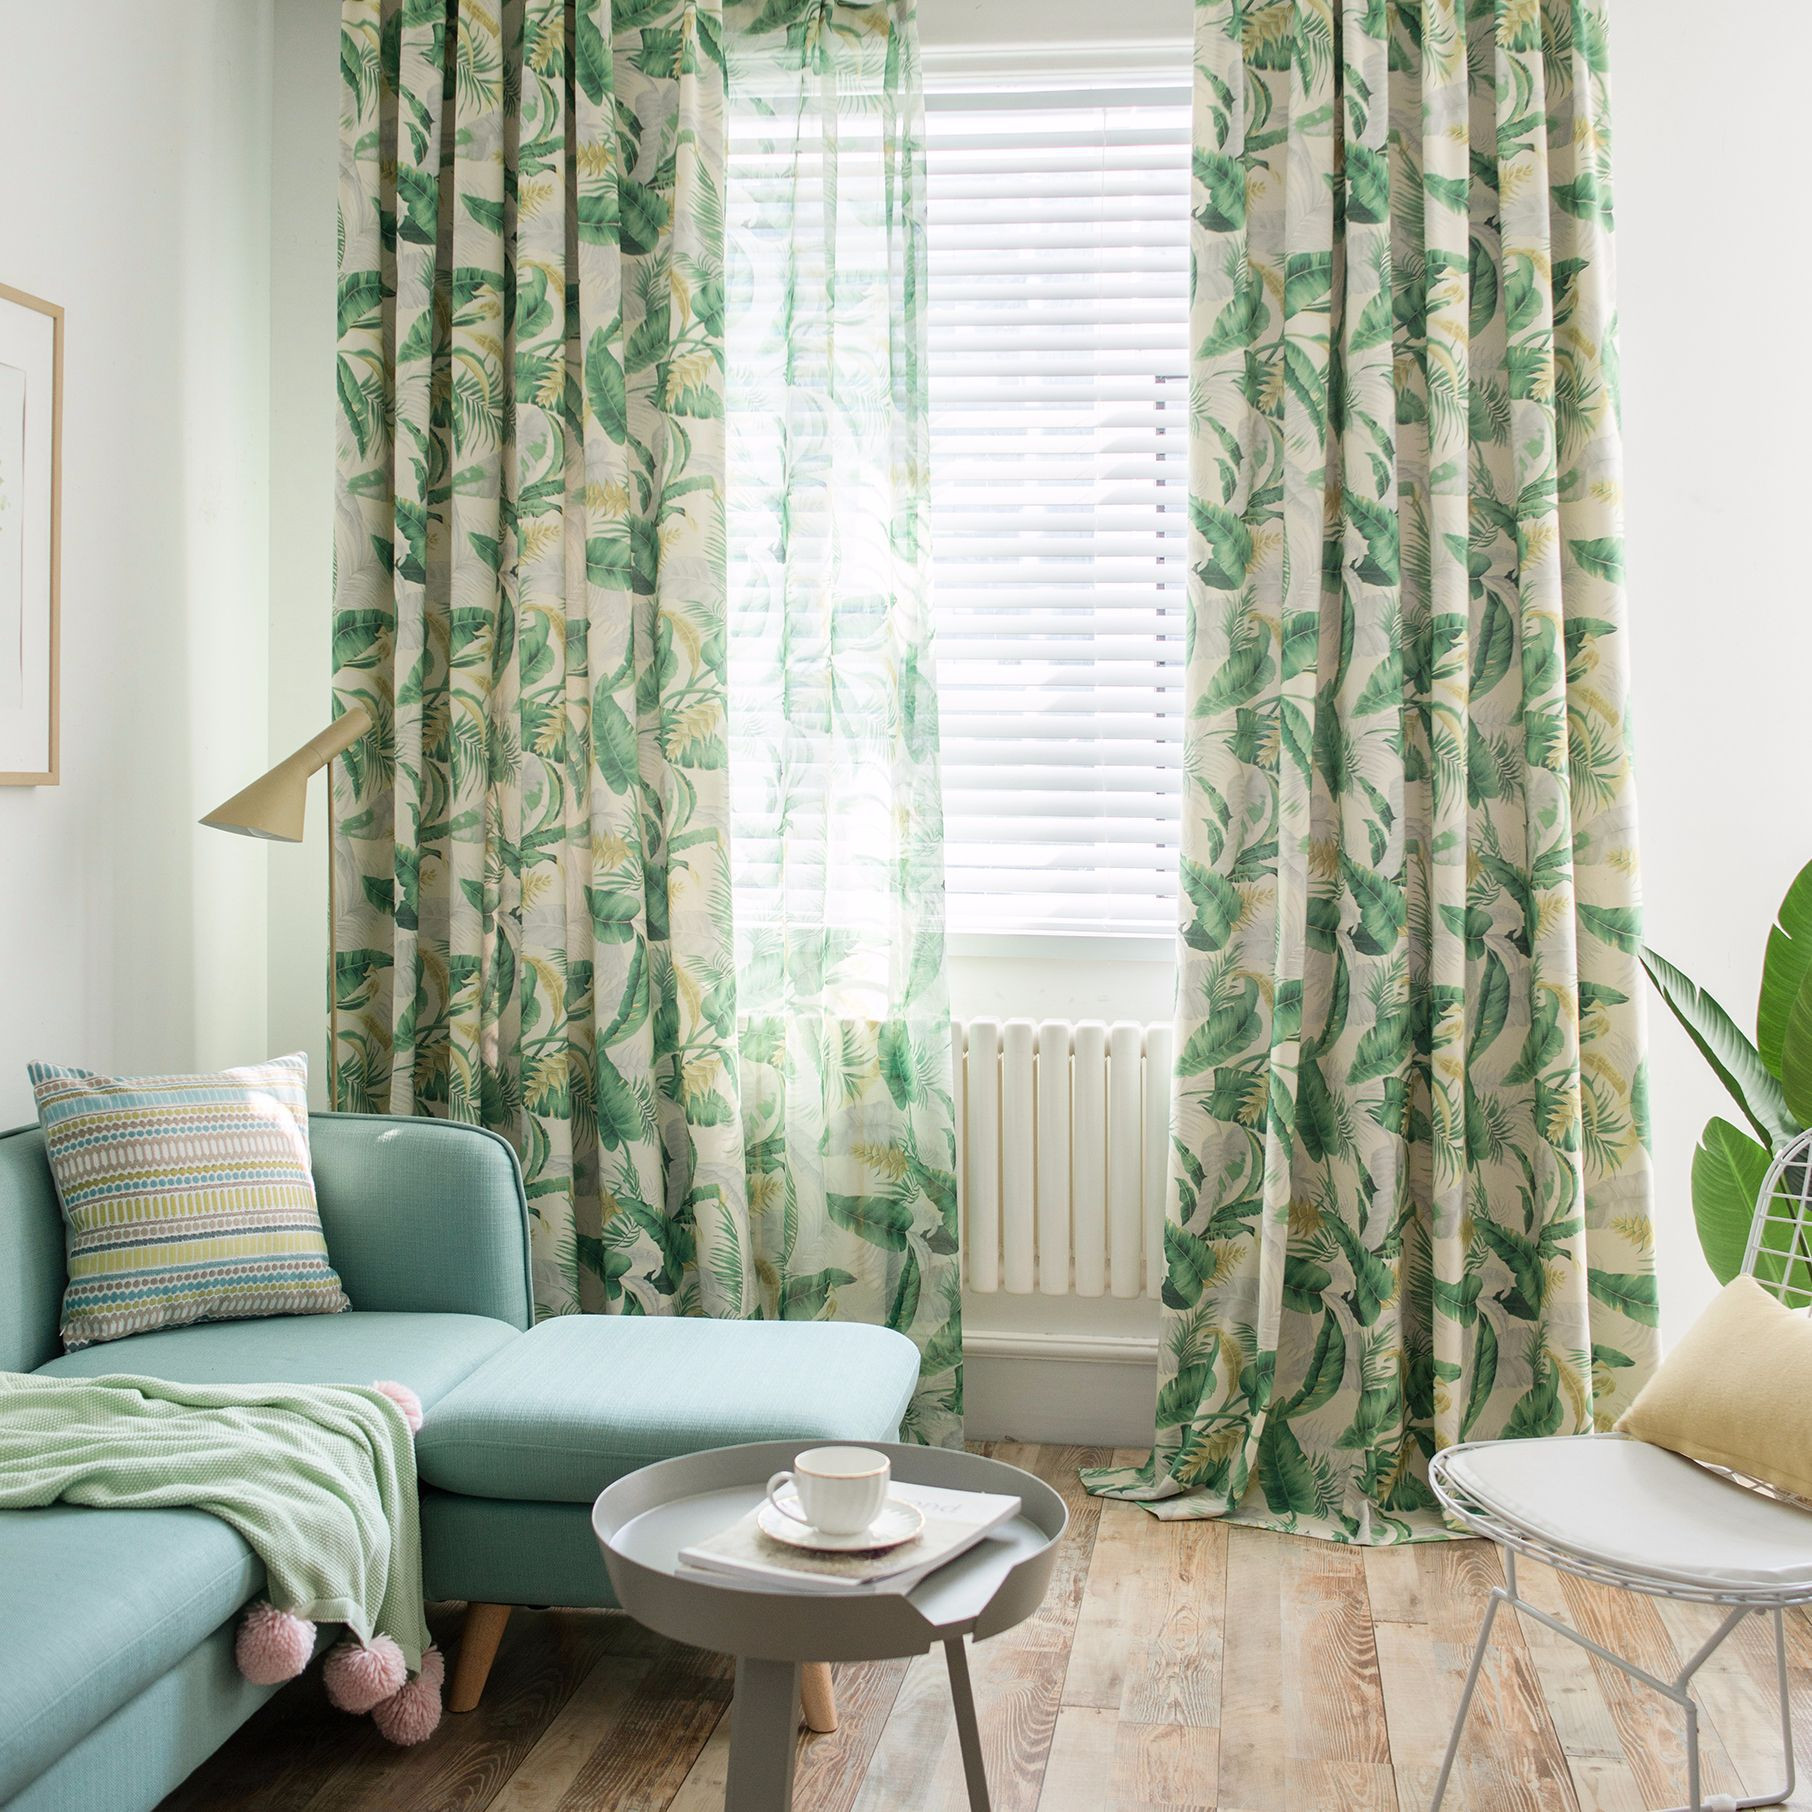 Macyamp039s Curtains For Living Room Elegant Slow Soul Grey Blue Green Forest King Curtain Quality Of Macy039s Curtains For Living Room 